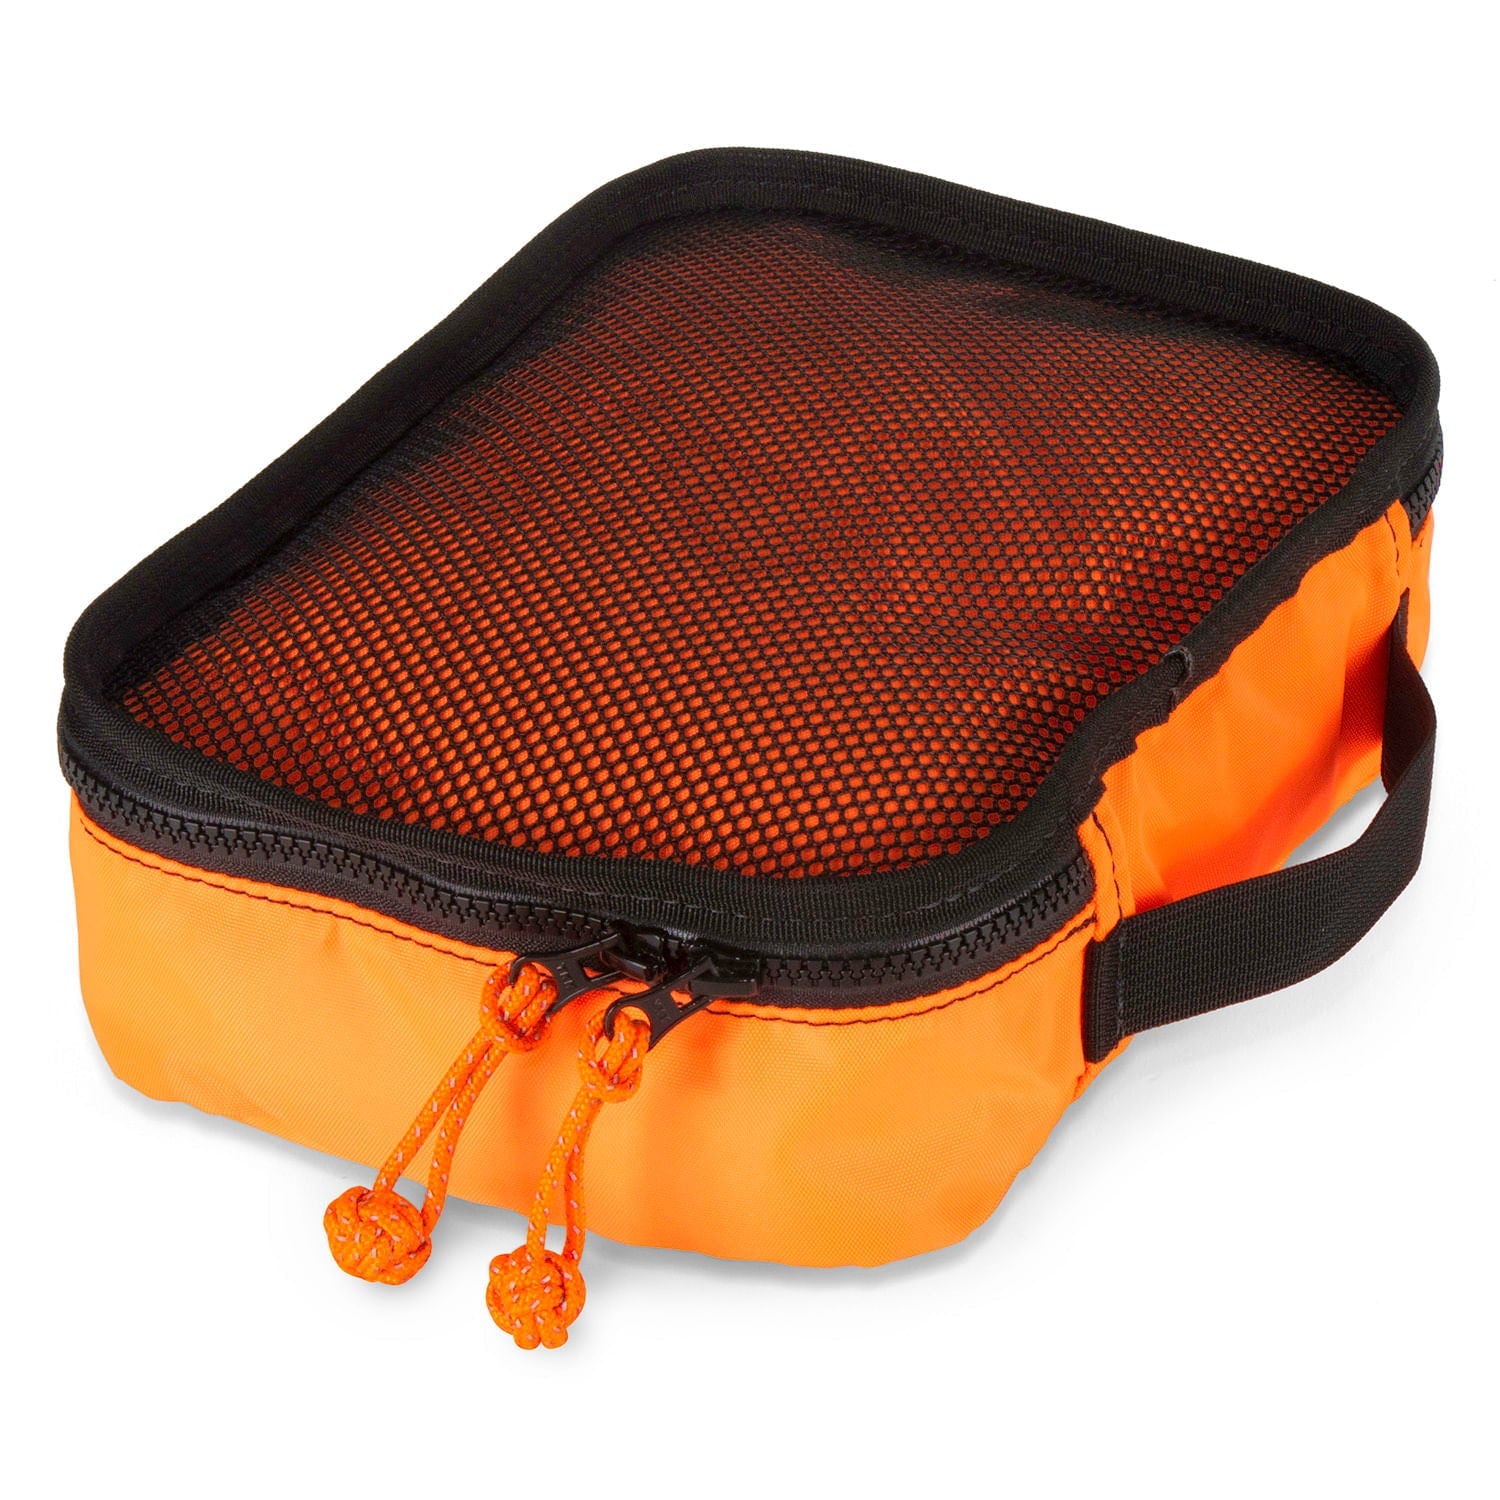 Orange Packing Cube with matching monkeys fist zip knots. Loop handle for carrying. 